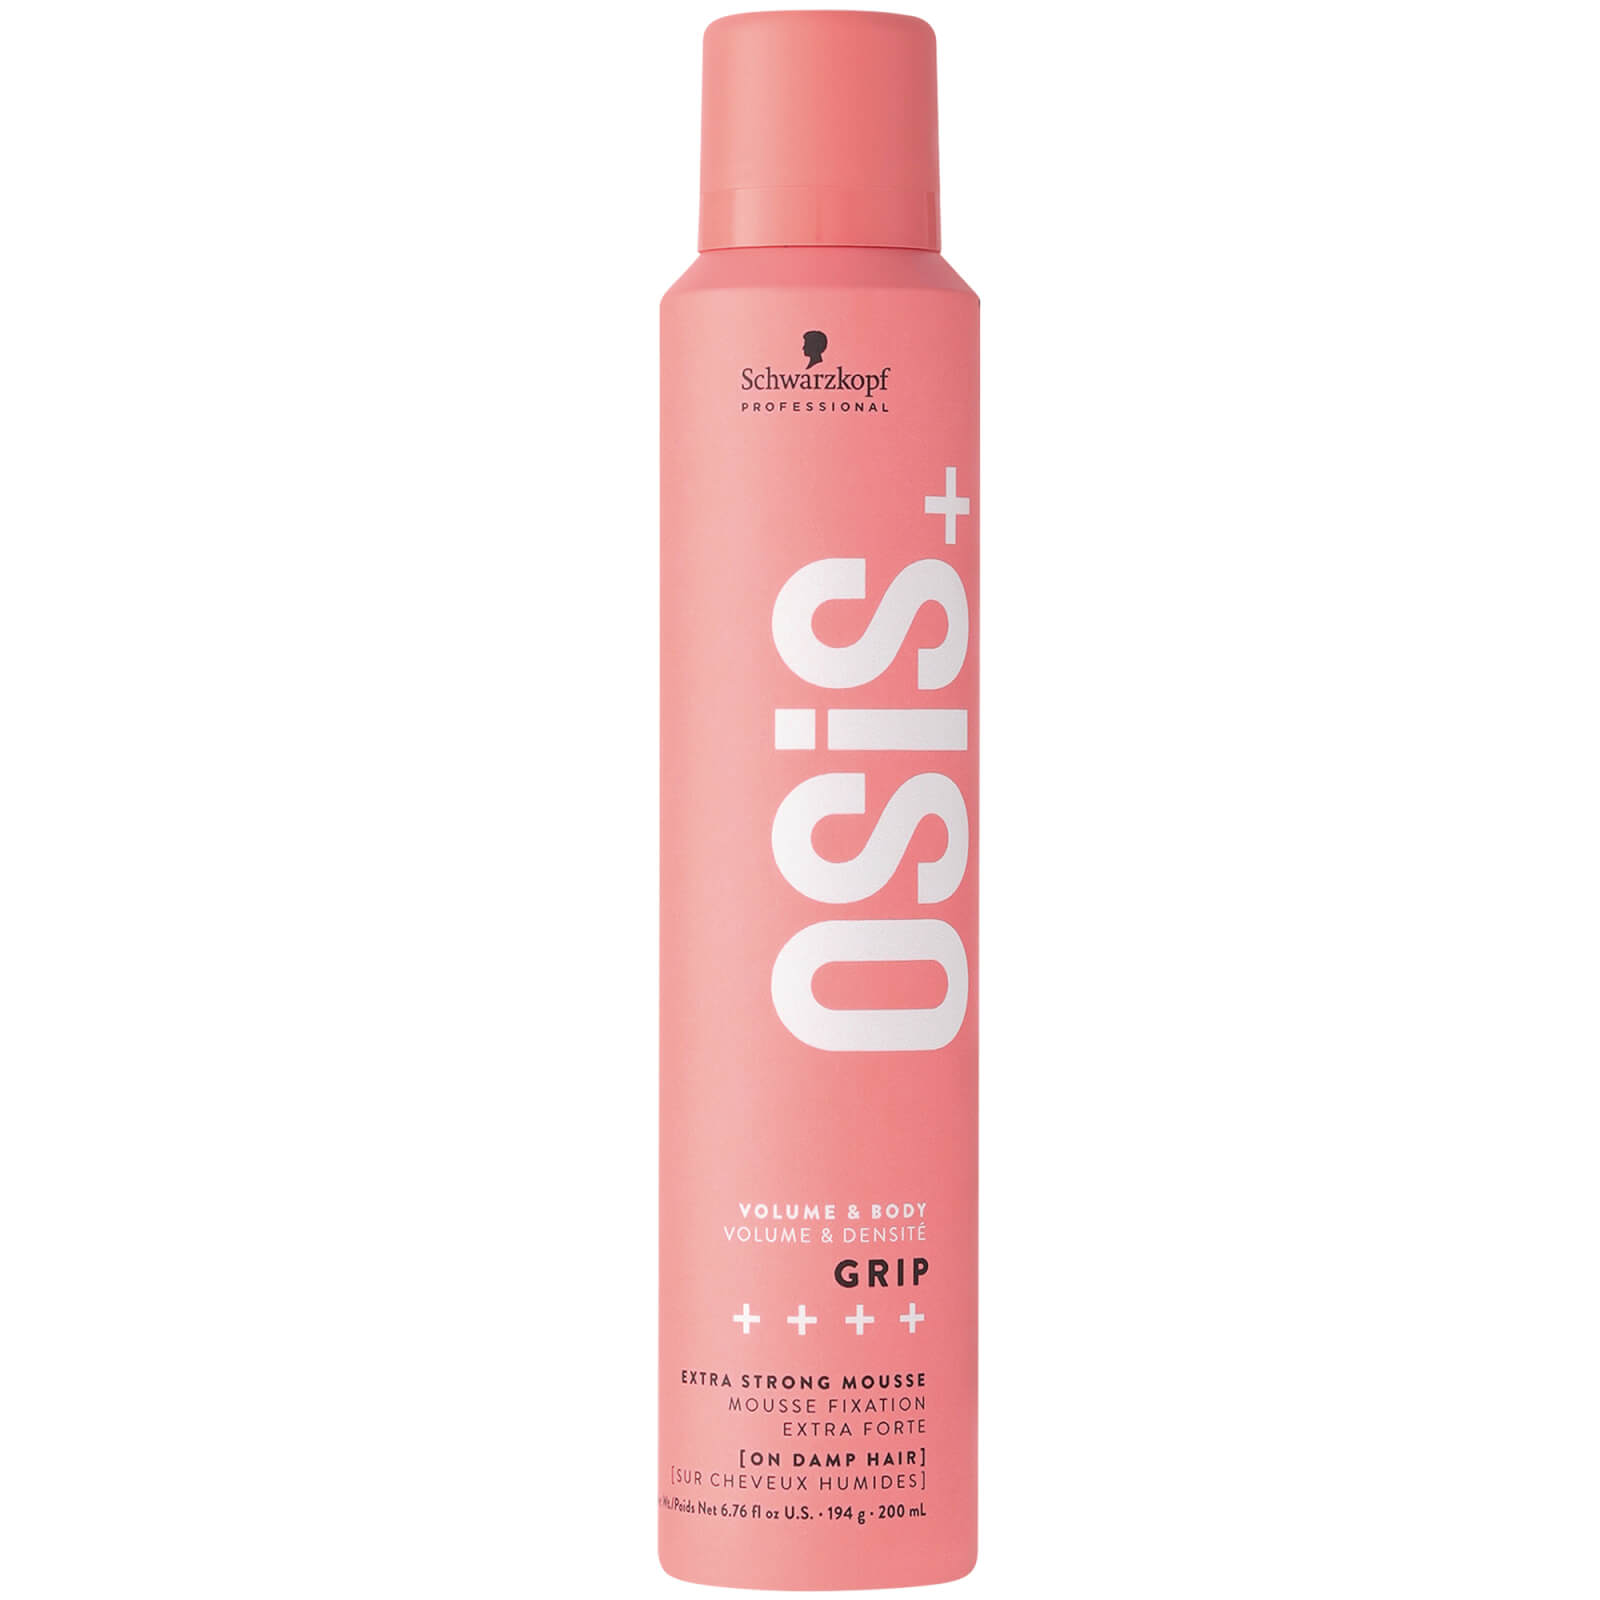 Schwarzkopf Professional OSiS+ Grip Extreme Hold Mousse for Massive Volume 200ml